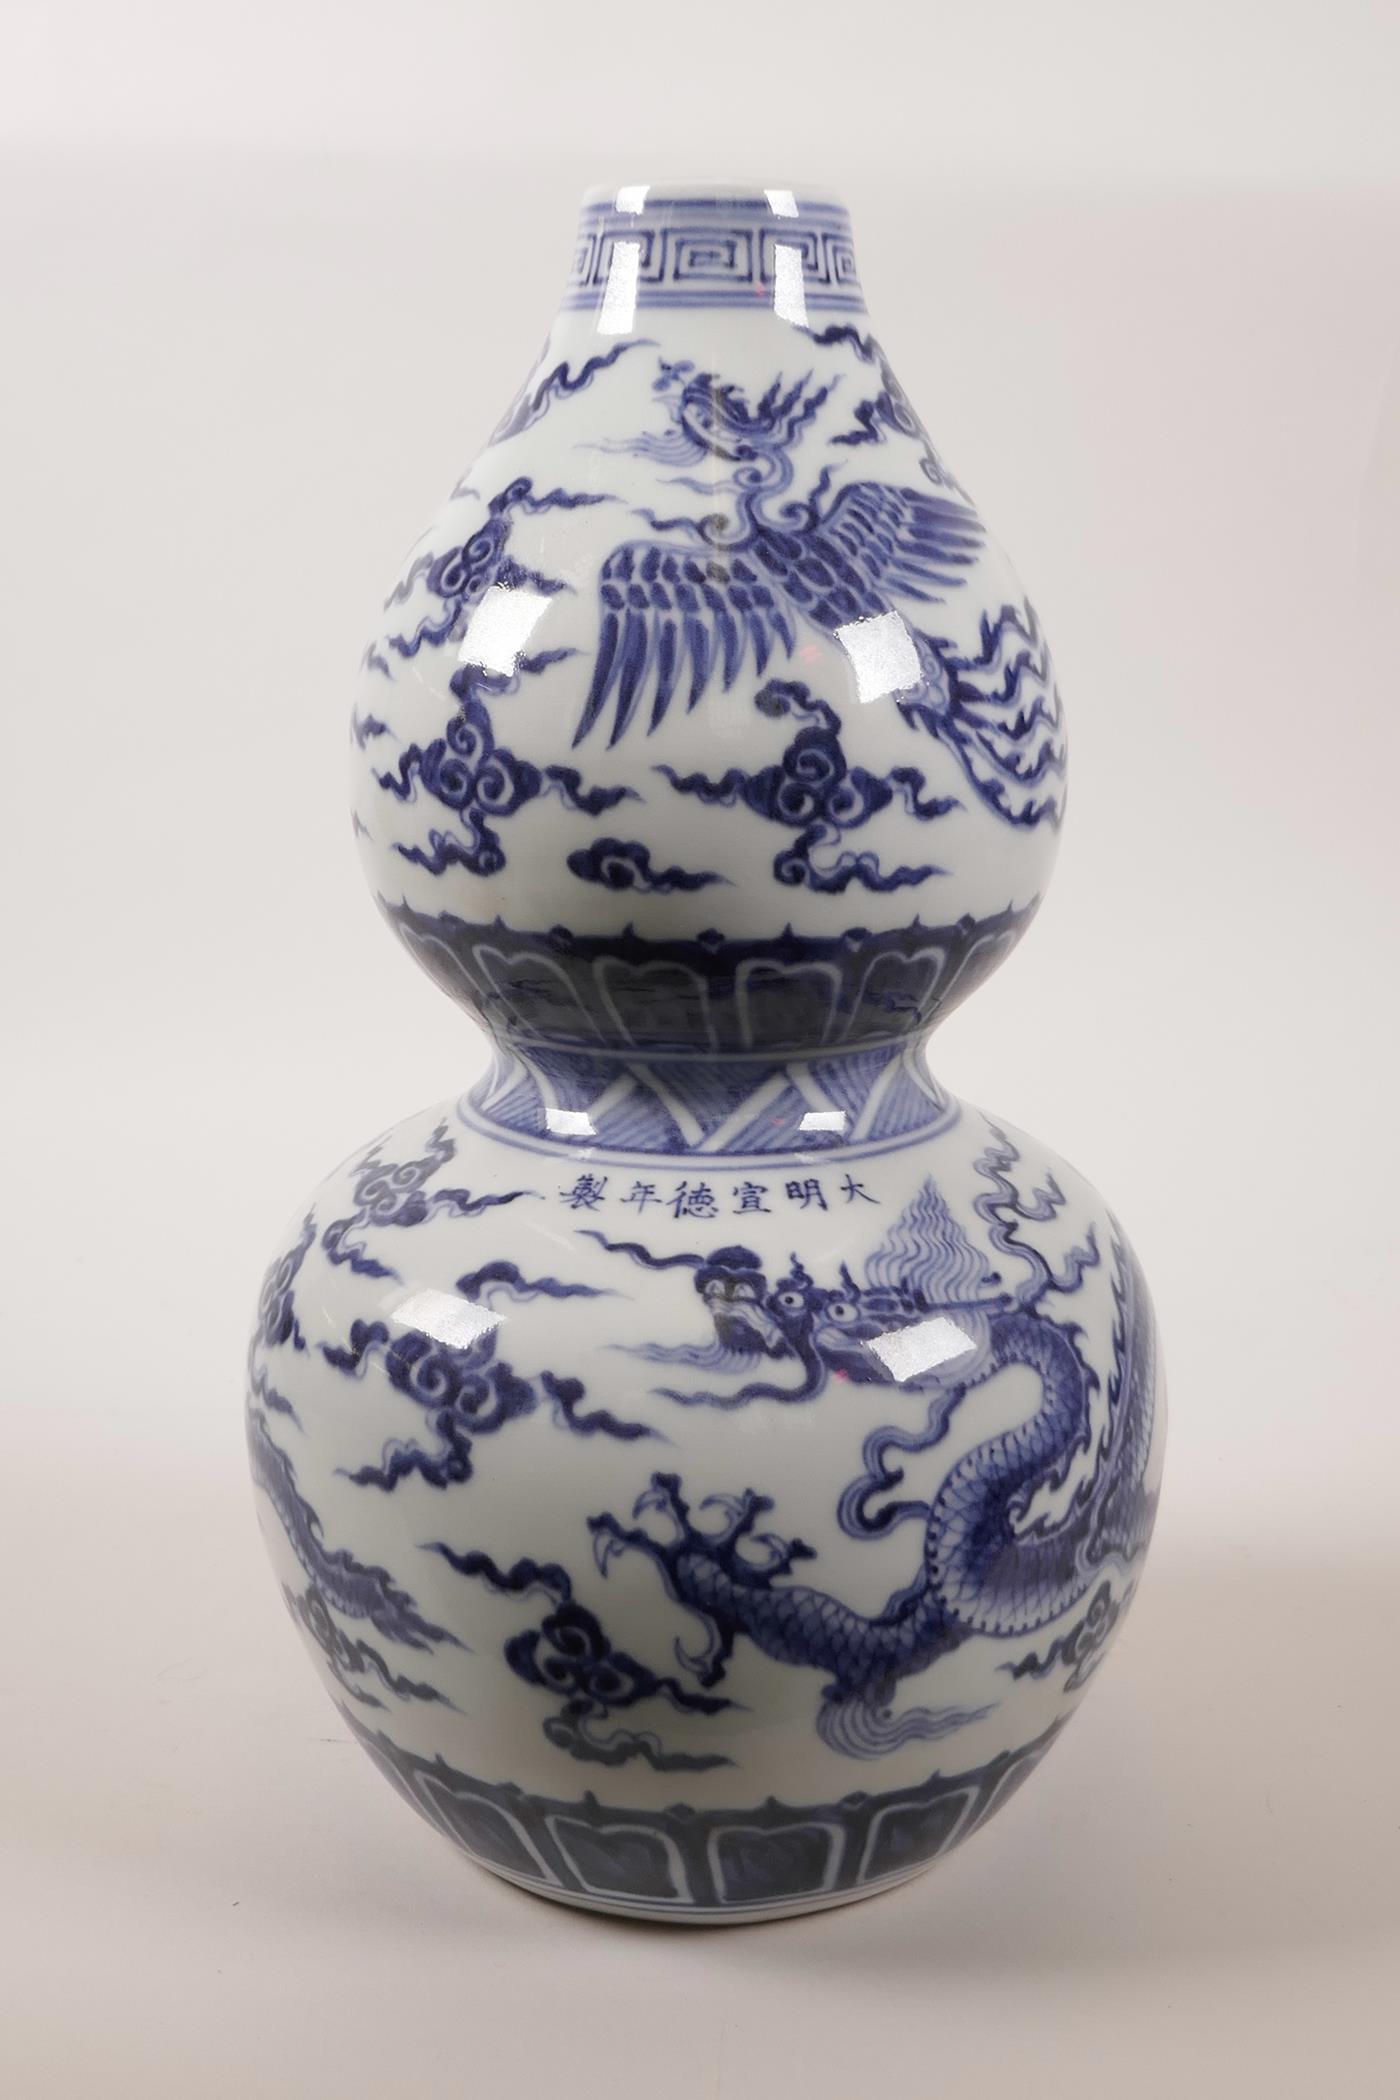 A Chinese double gourd pottery vase decorated with a dragon and phoenix in flight, 6 character